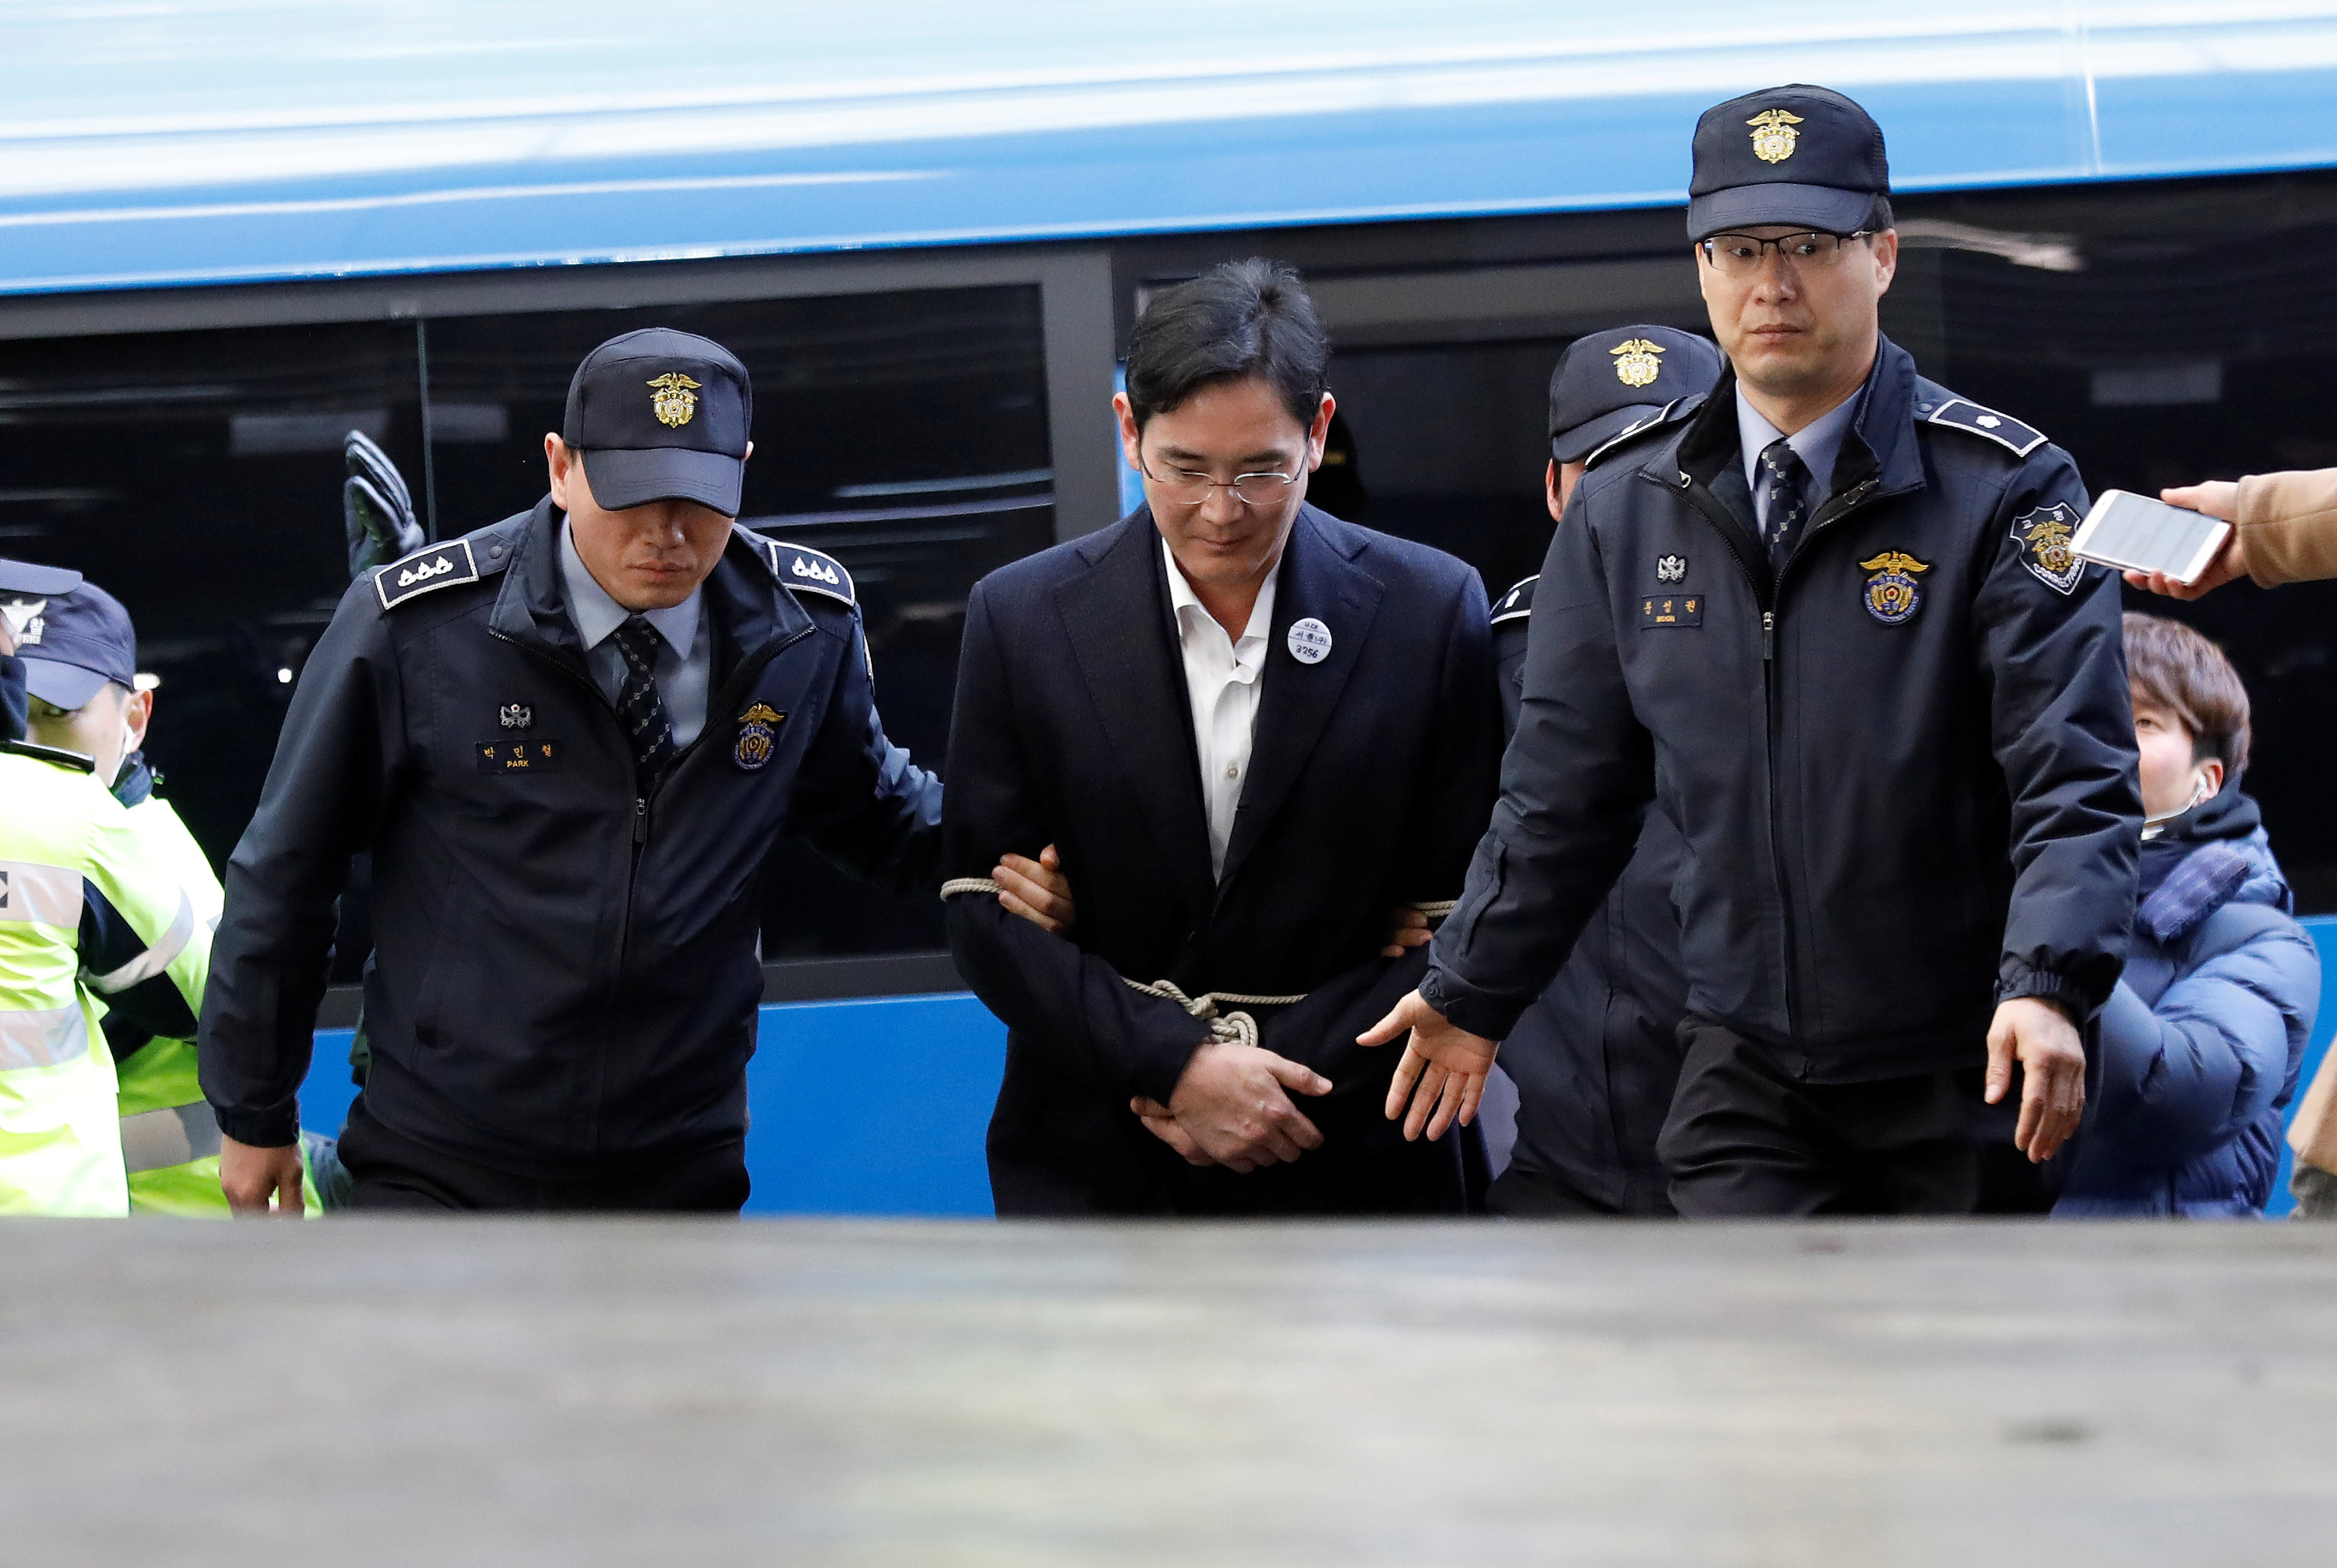 Samsung scion taken for questioning after night in cell